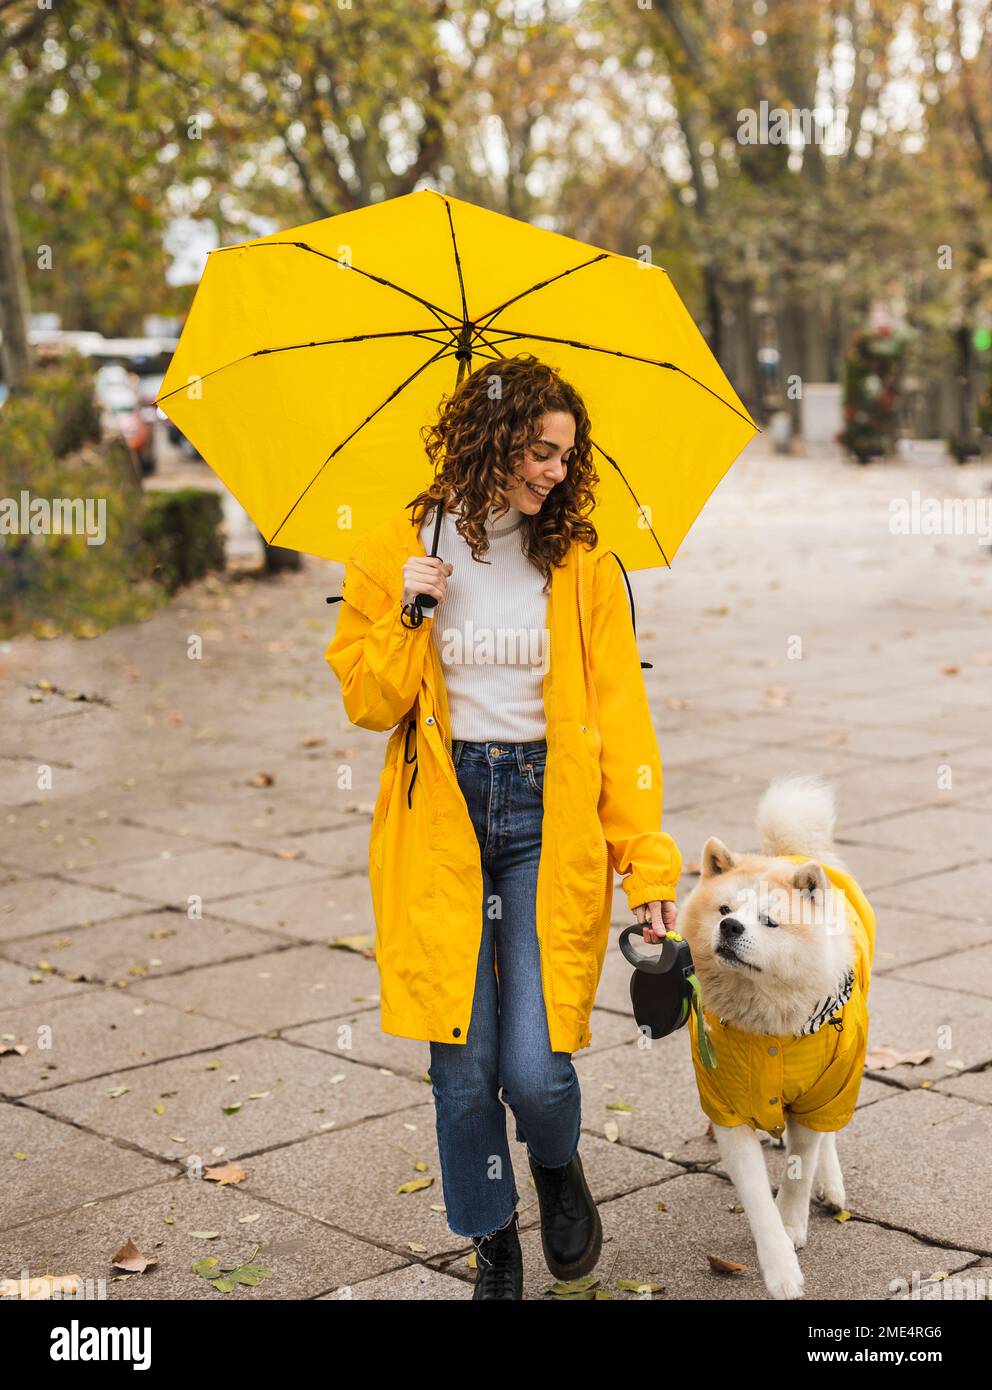 Happy beautiful woman holding umbrella and walking with dog at footpath Stock Photo